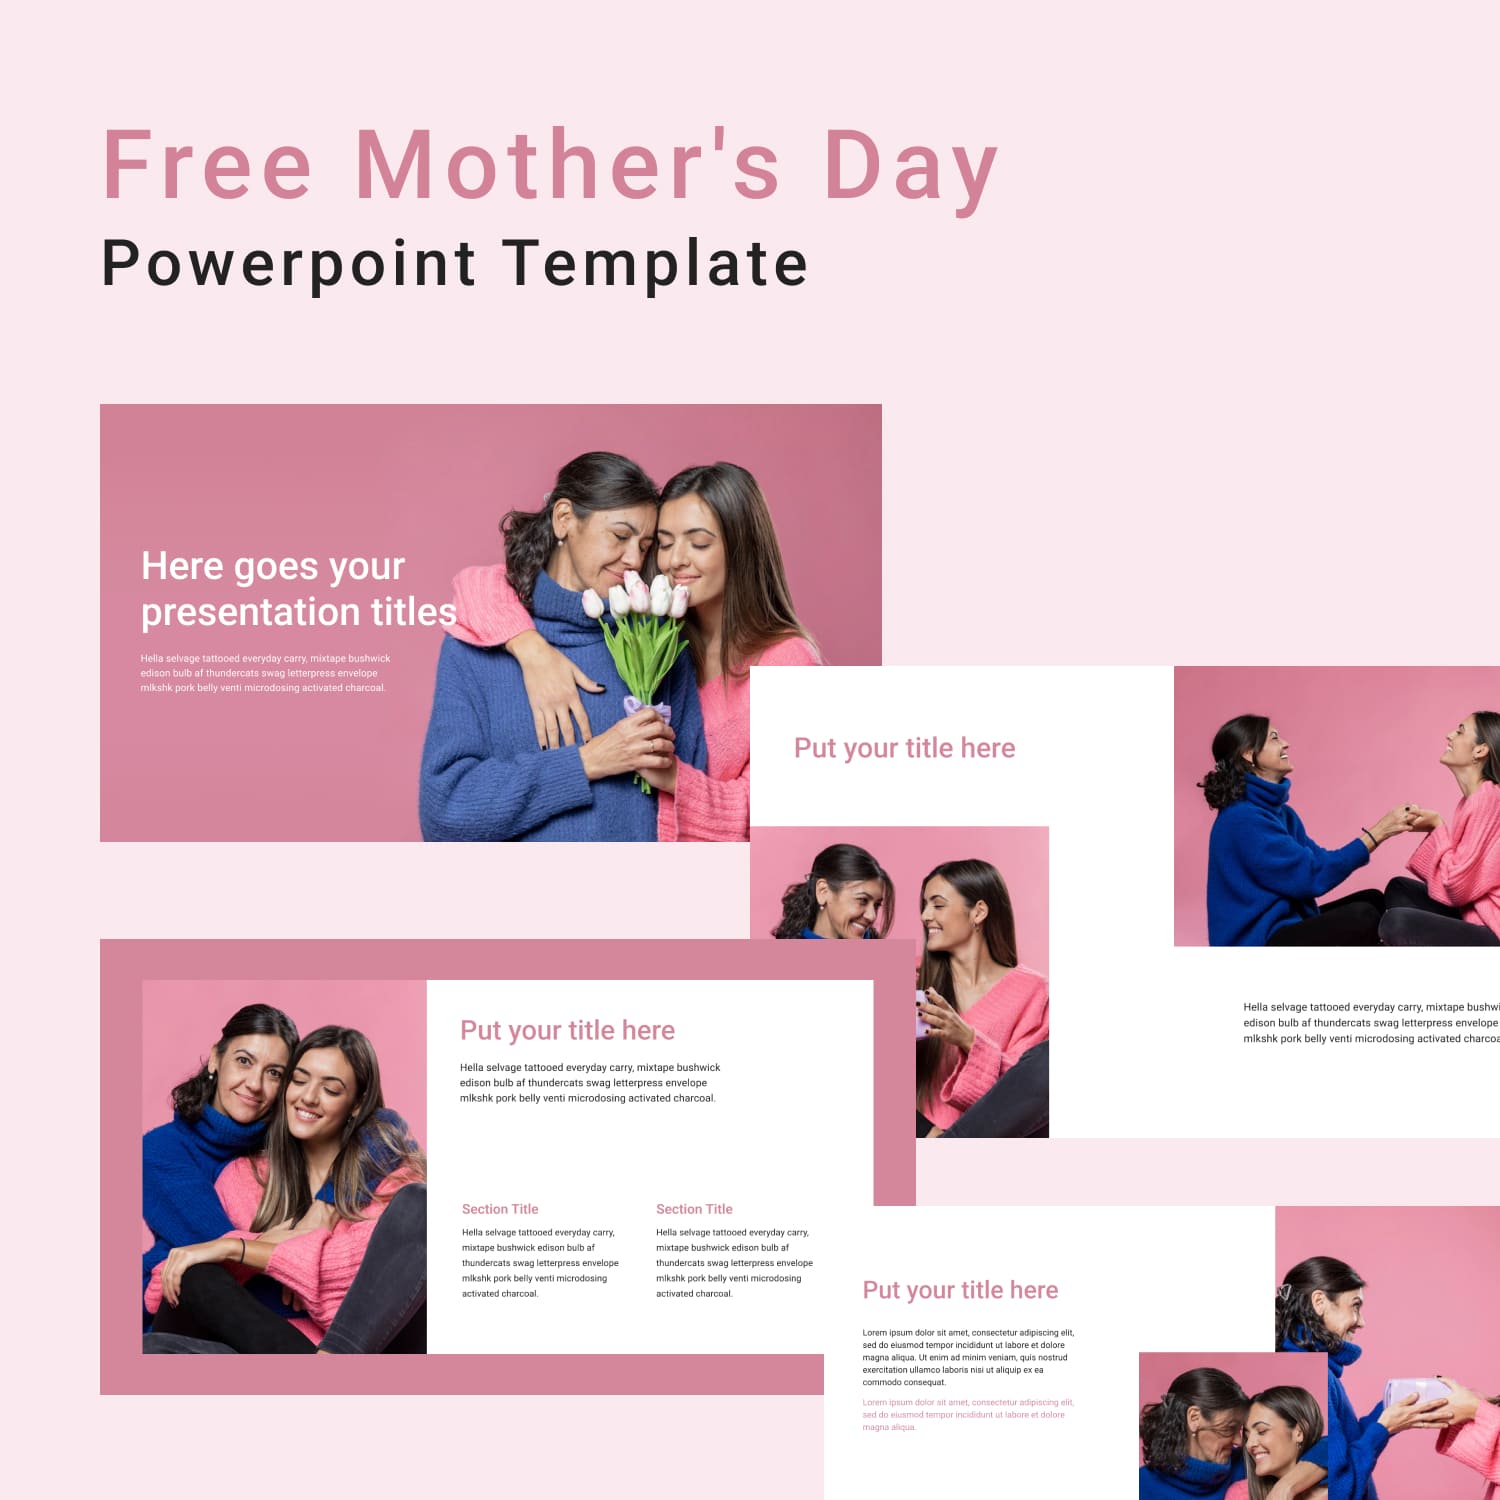 Images with Mothers Day Powerpoint Template.